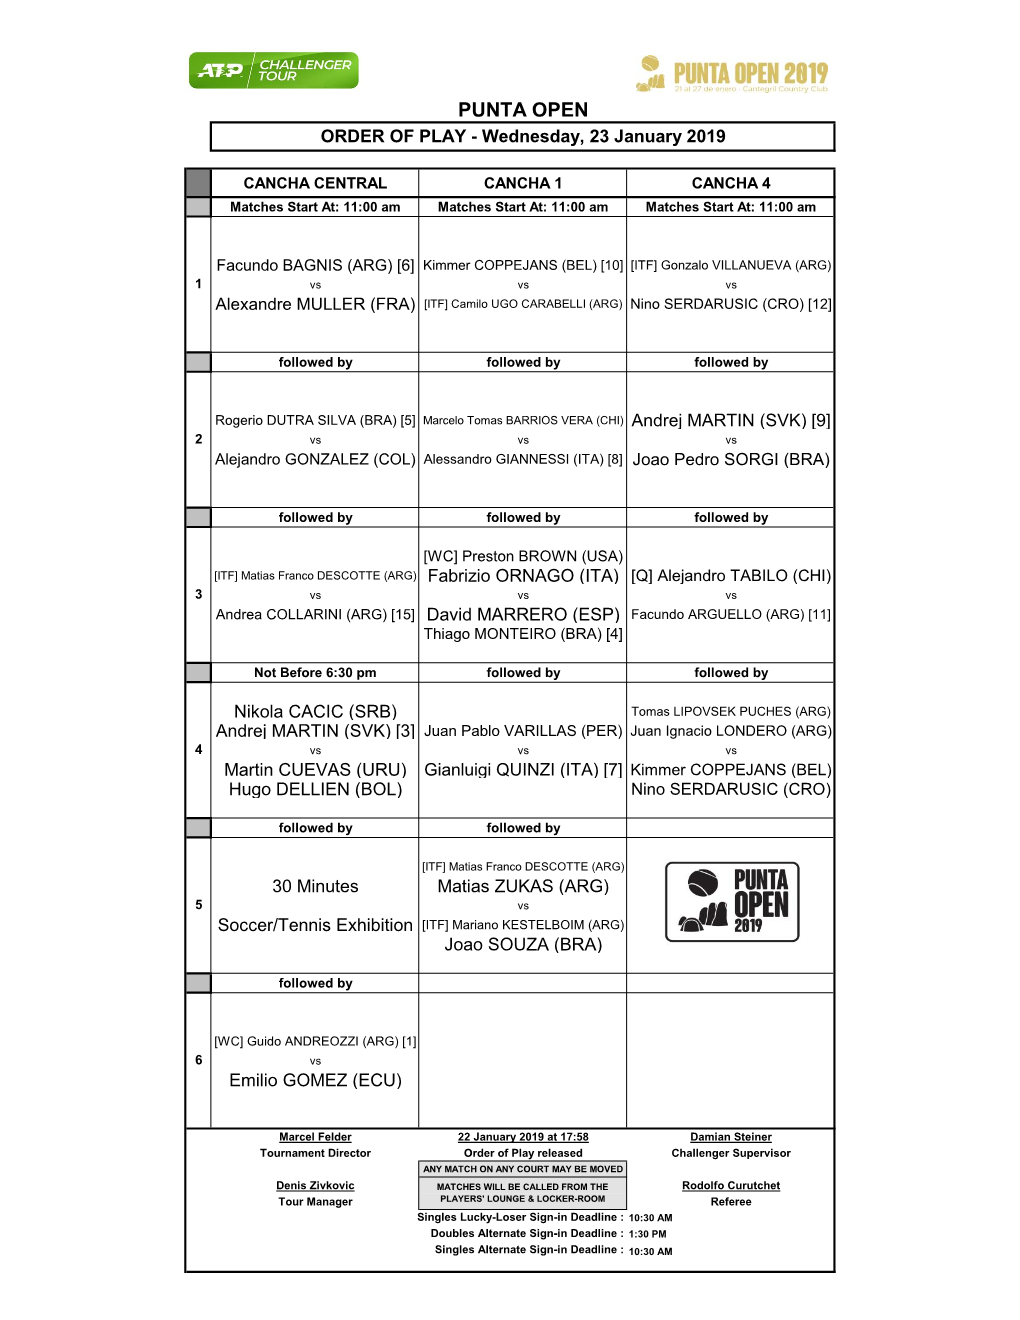 PUNTA OPEN ORDER of PLAY - Wednesday, 23 January 2019